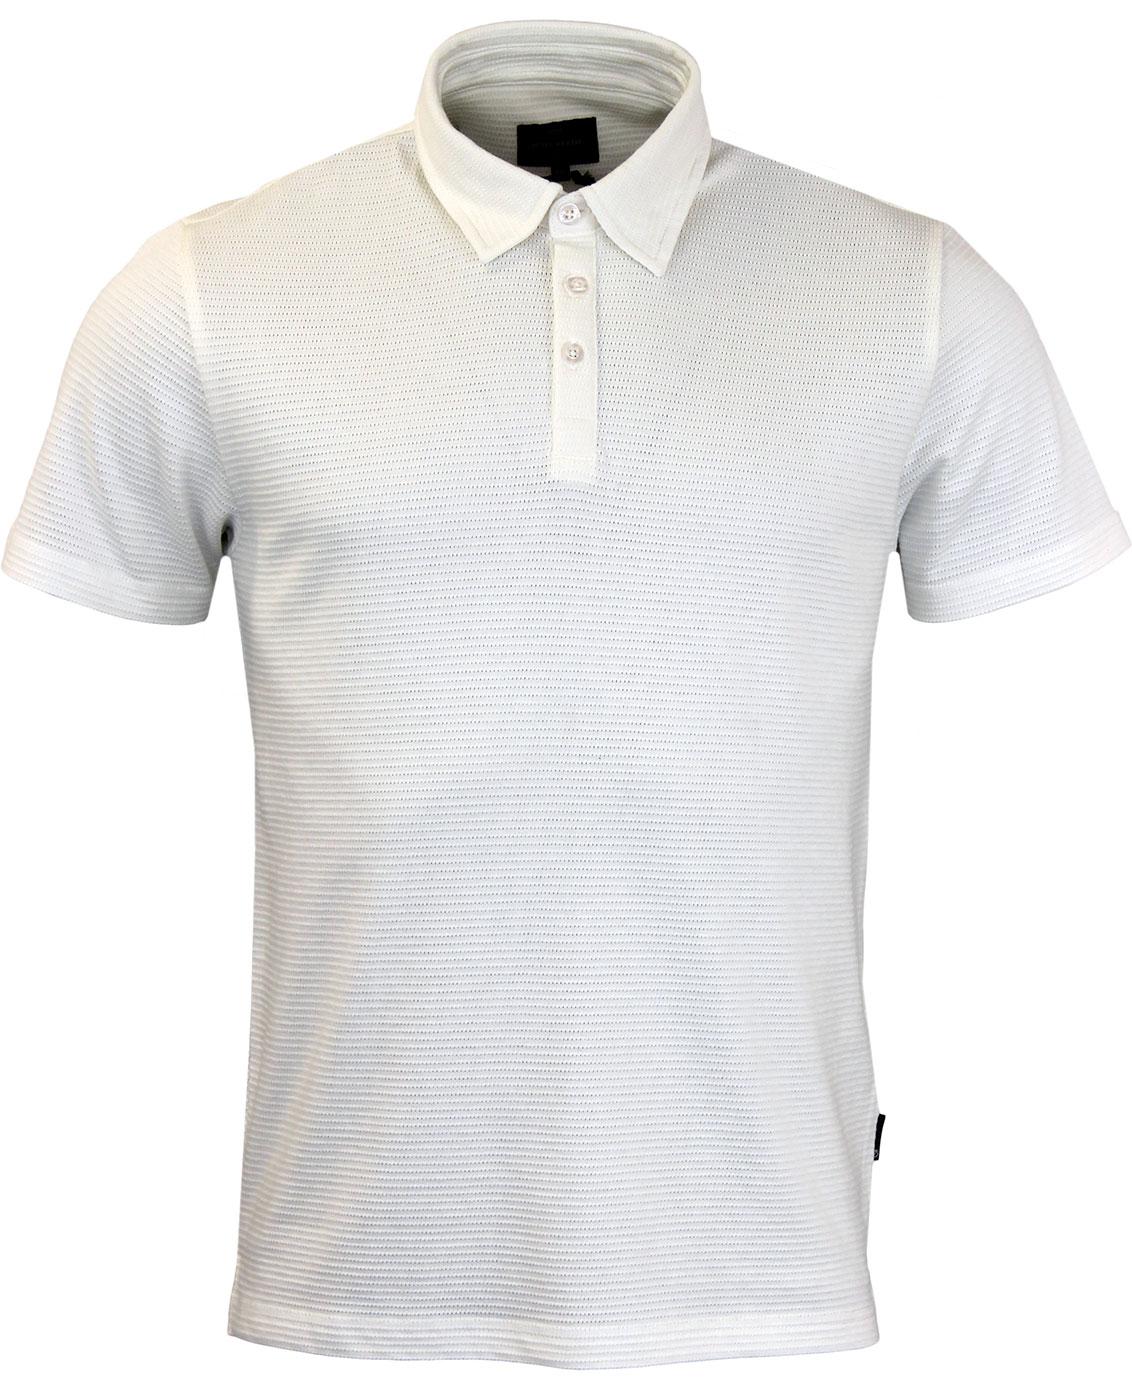 Lombard PETER WERTH Textured Perf Retro Mod Polo W